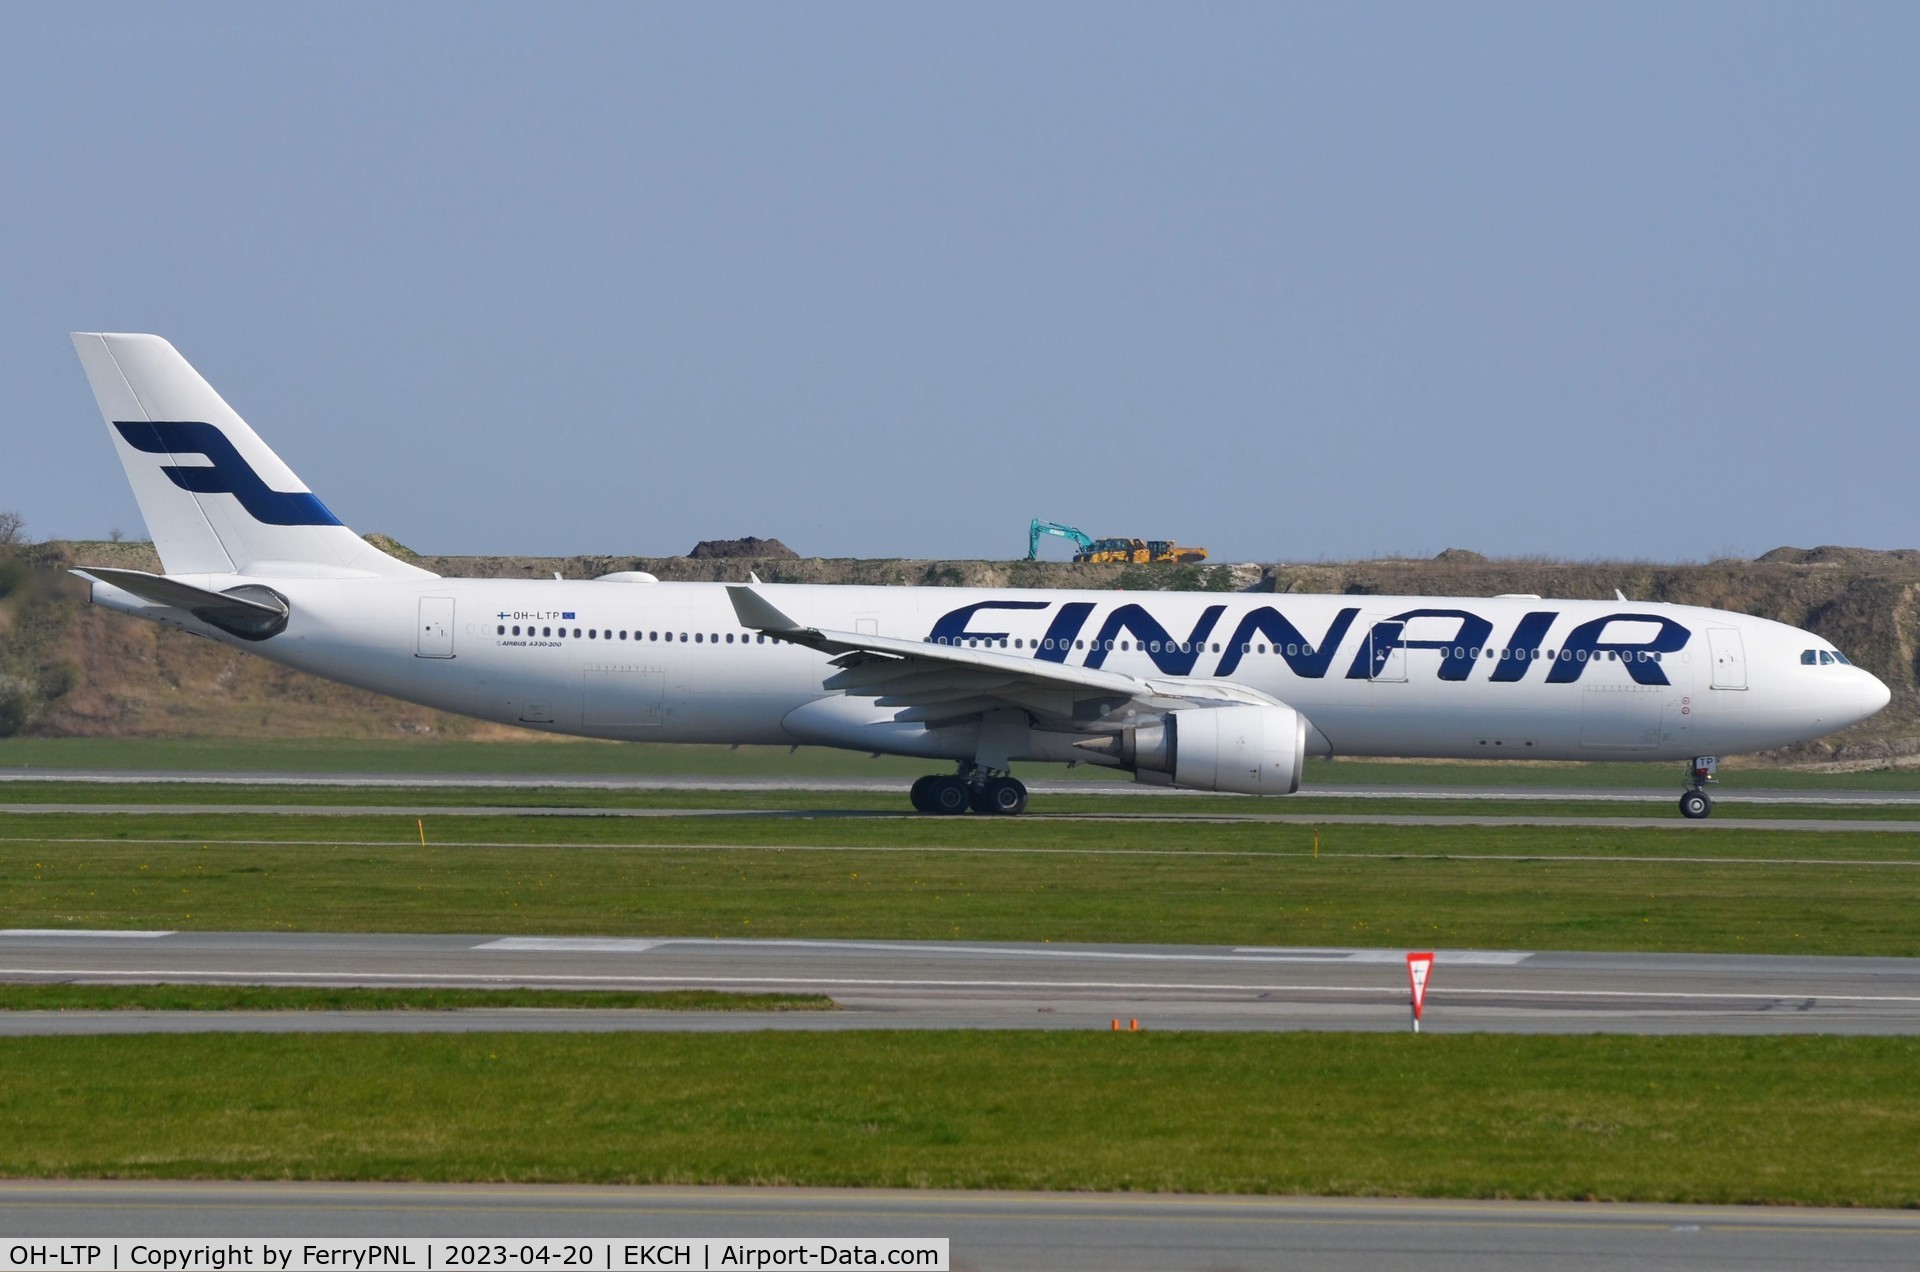 OH-LTP, 2009 Airbus A330-302X C/N 1023, Finnair A333 departing for Helsinki after arriving from Doha.